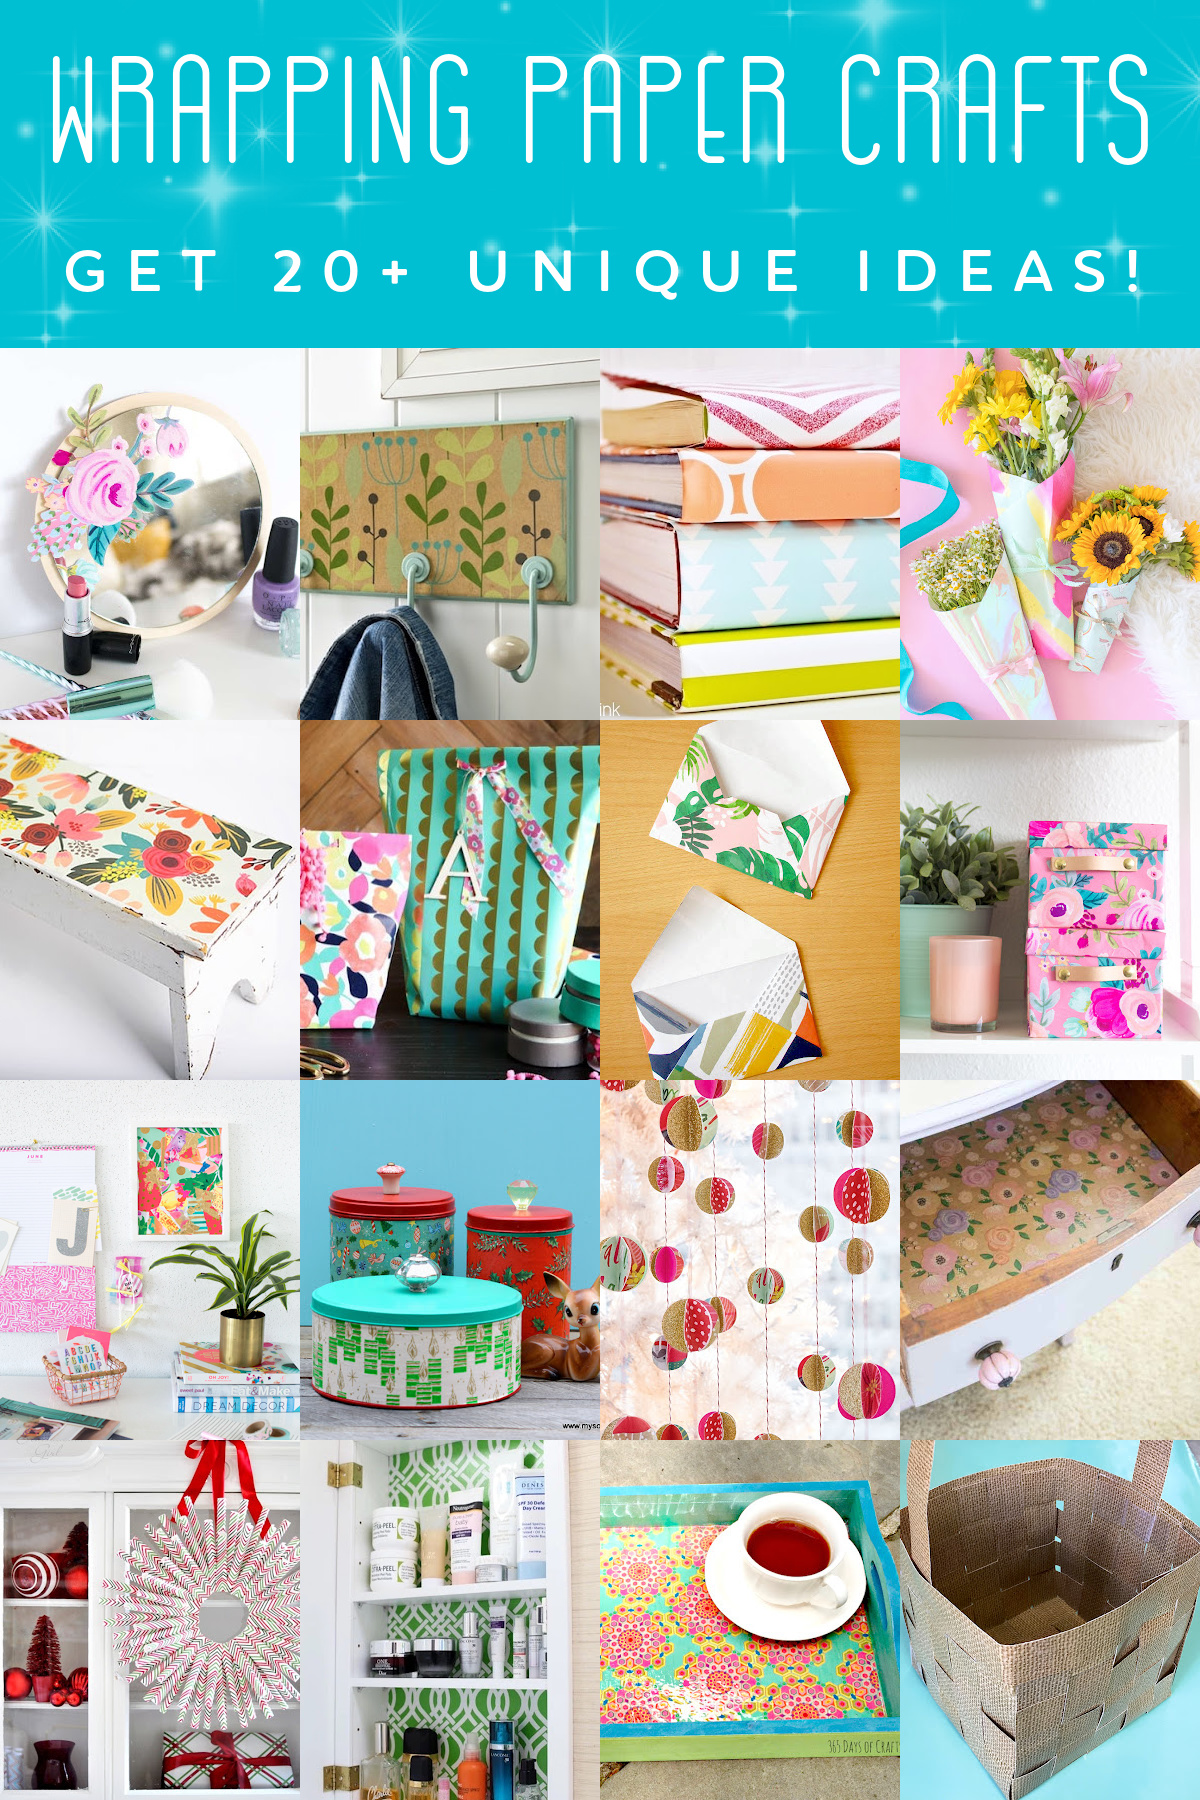 Wrapping Paper Crafts to Use Up Leftovers! - Mod Podge Rocks